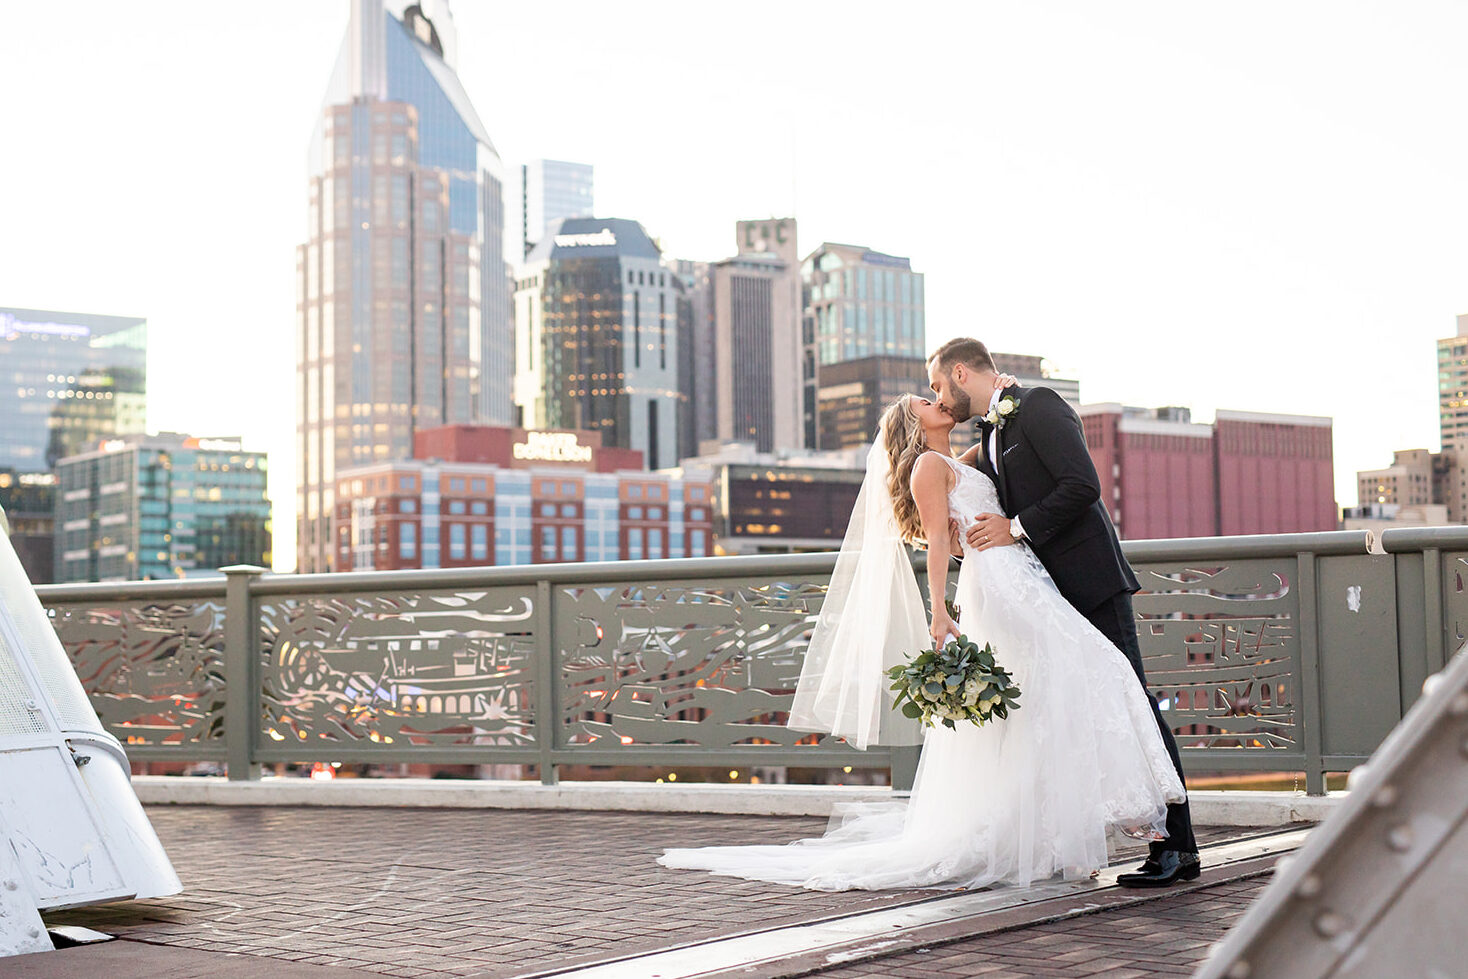 A romantic kiss shared between newlyweds on the pedestrian bridge in Nashville following their wedding ceremony at the Bridge Building. 